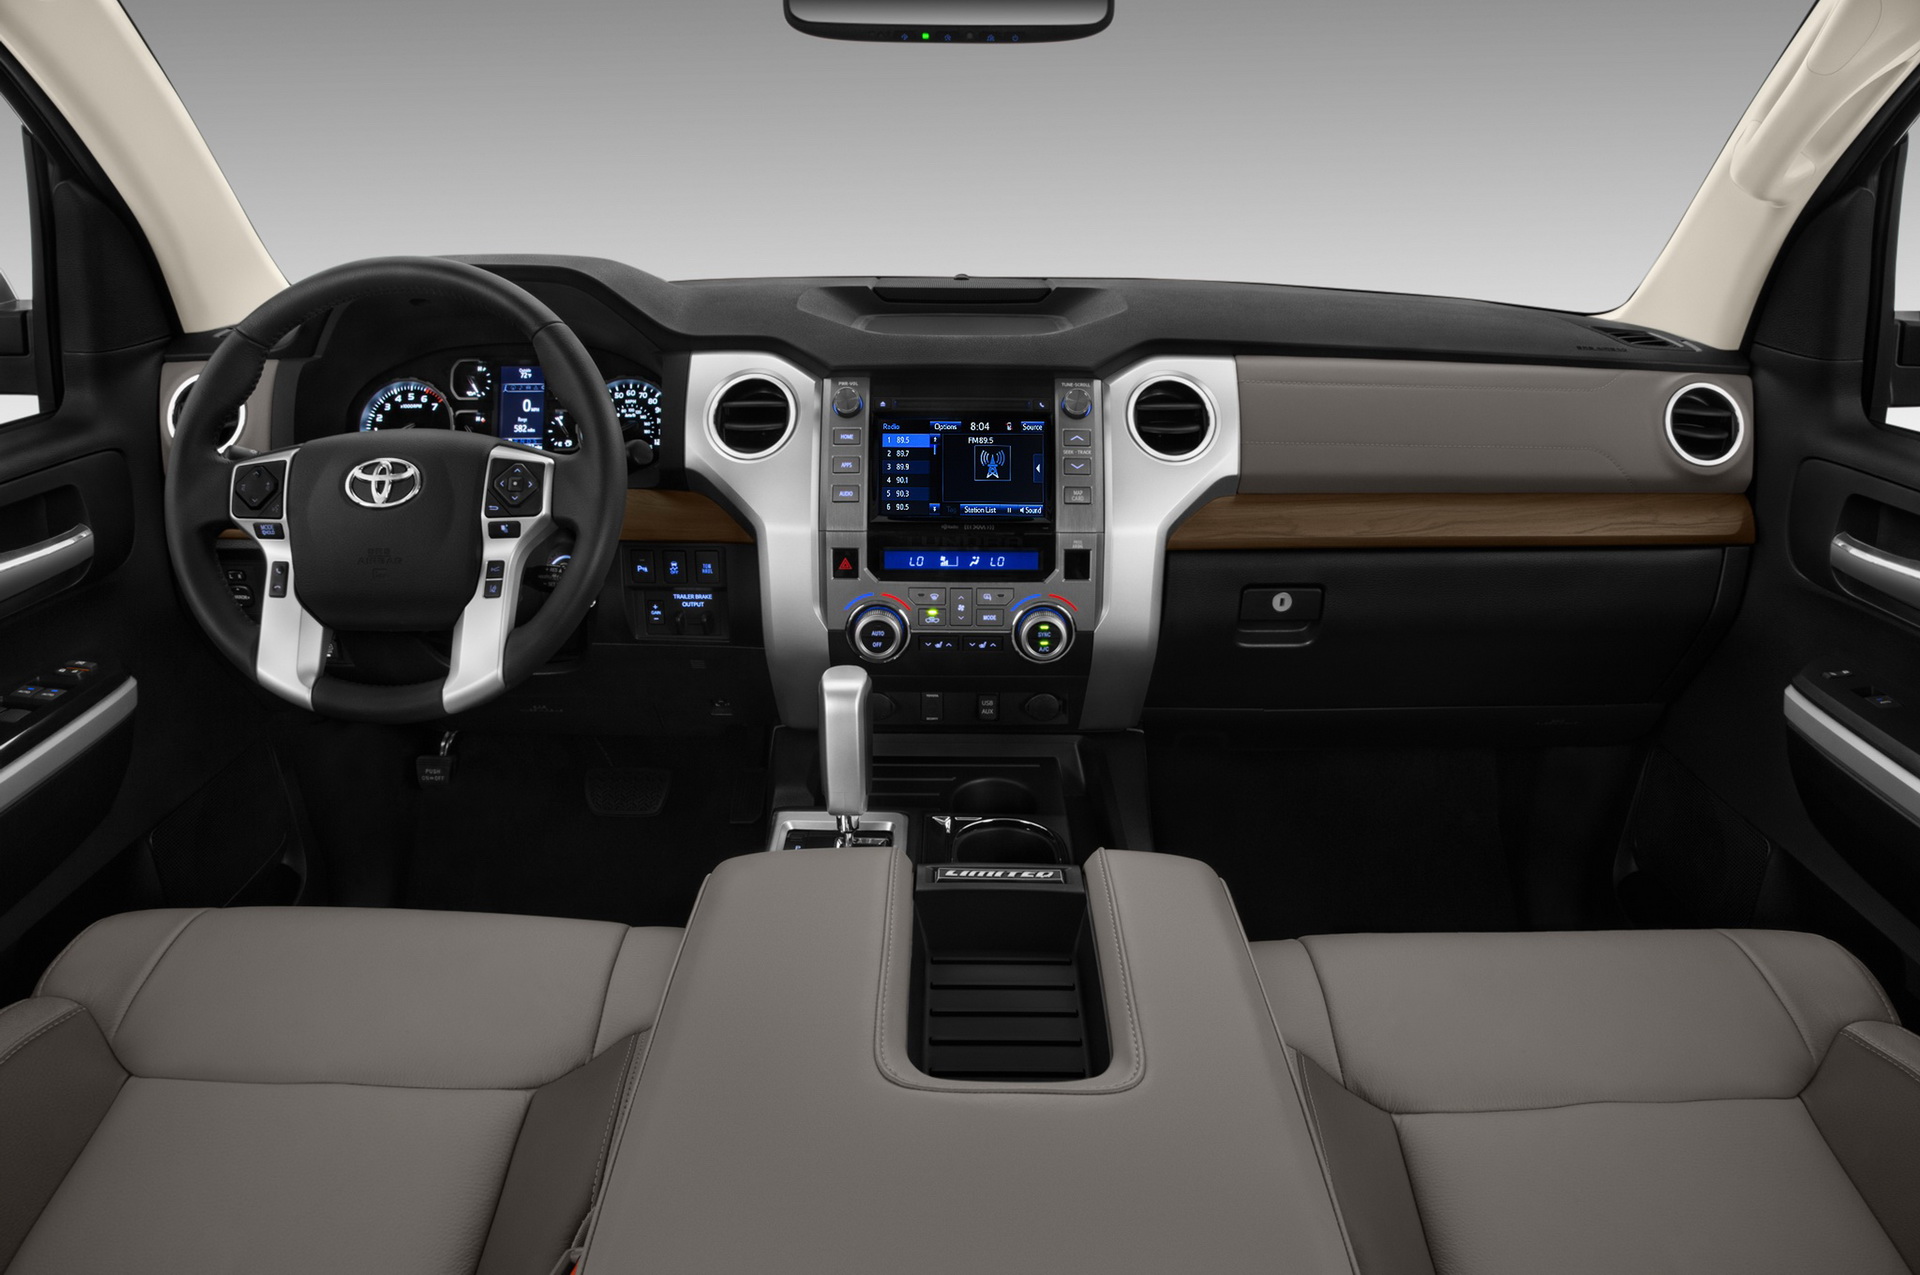 425New Look 2014 toyota tundra radio update for Android Wallpaper